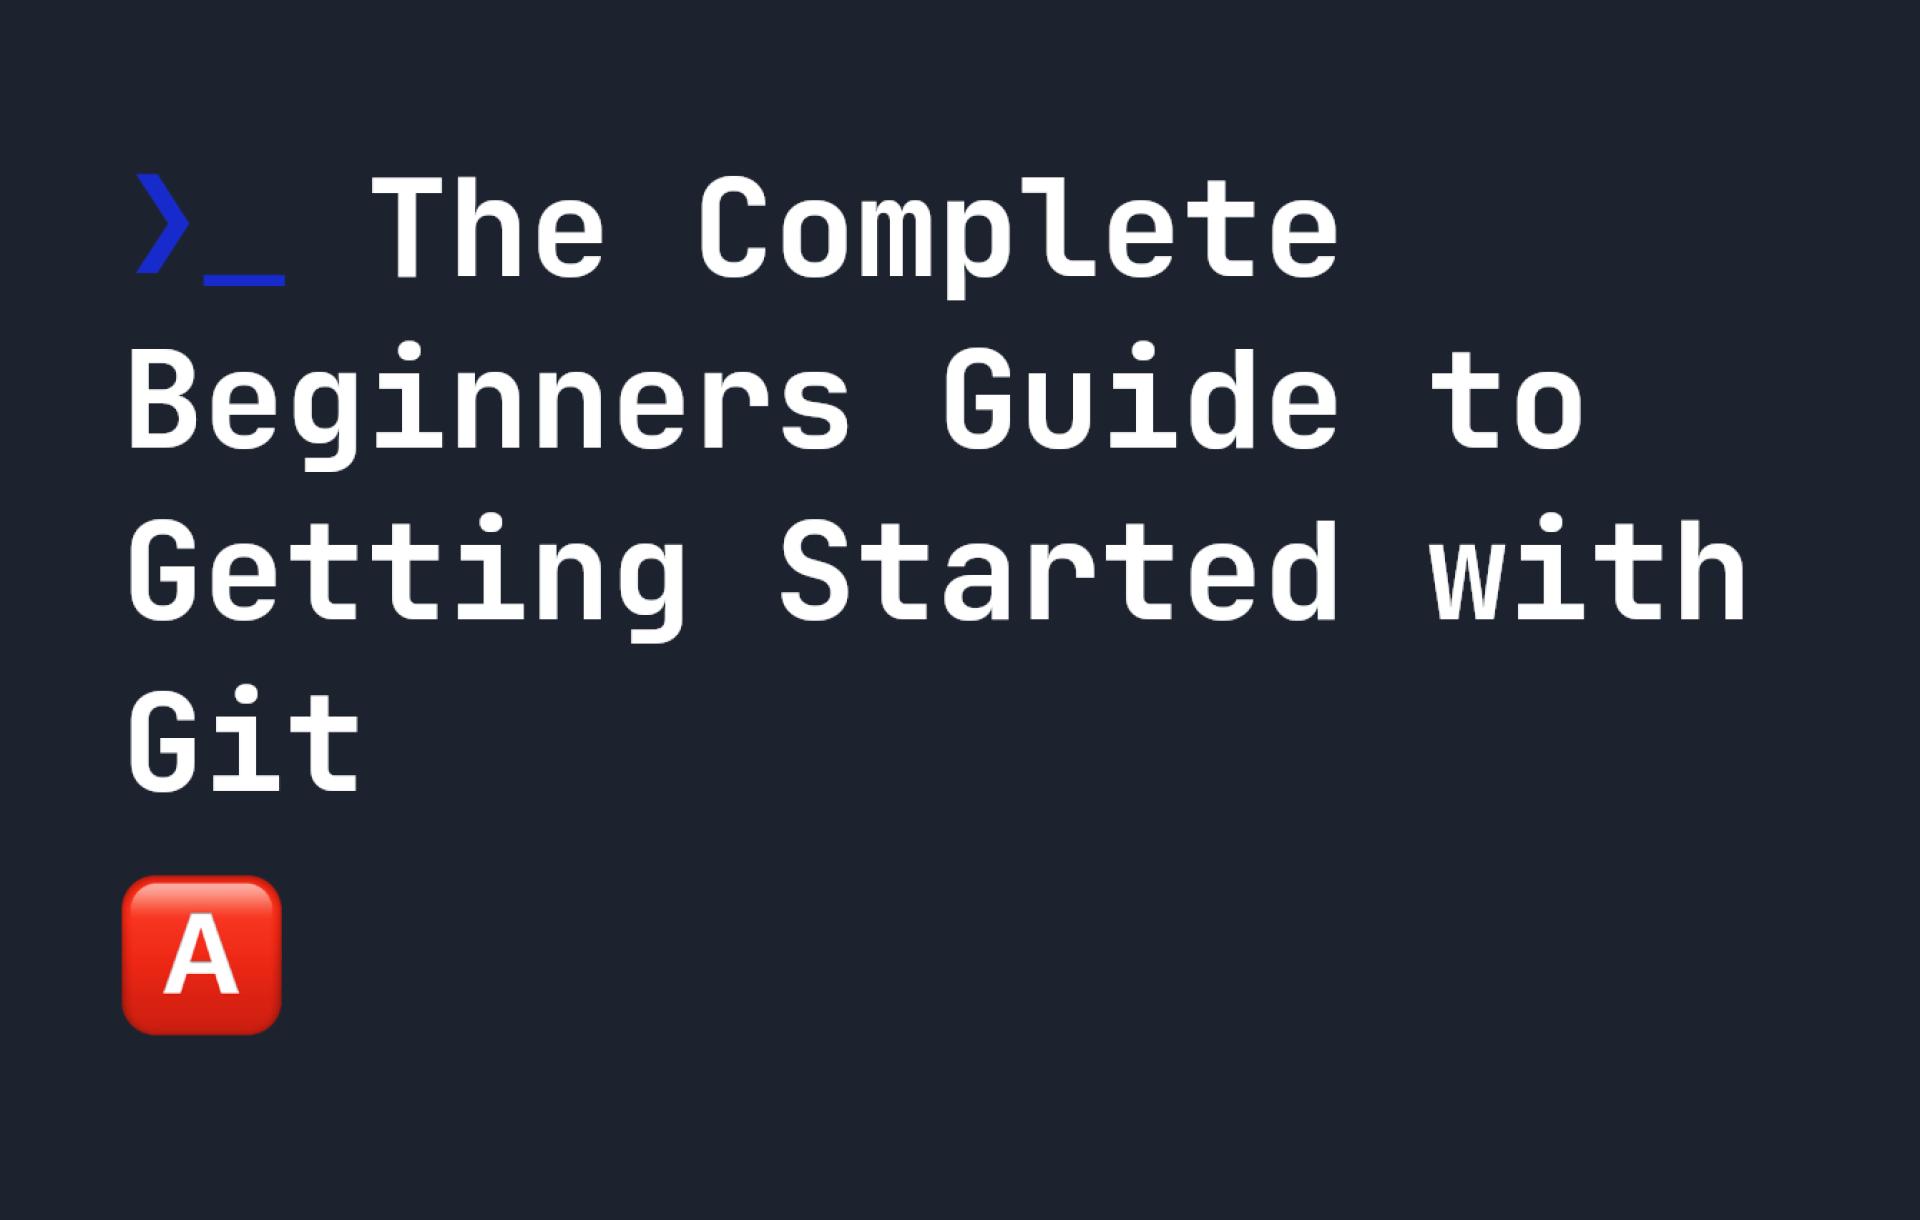 The Complete Beginners Guide to Getting Started with Git